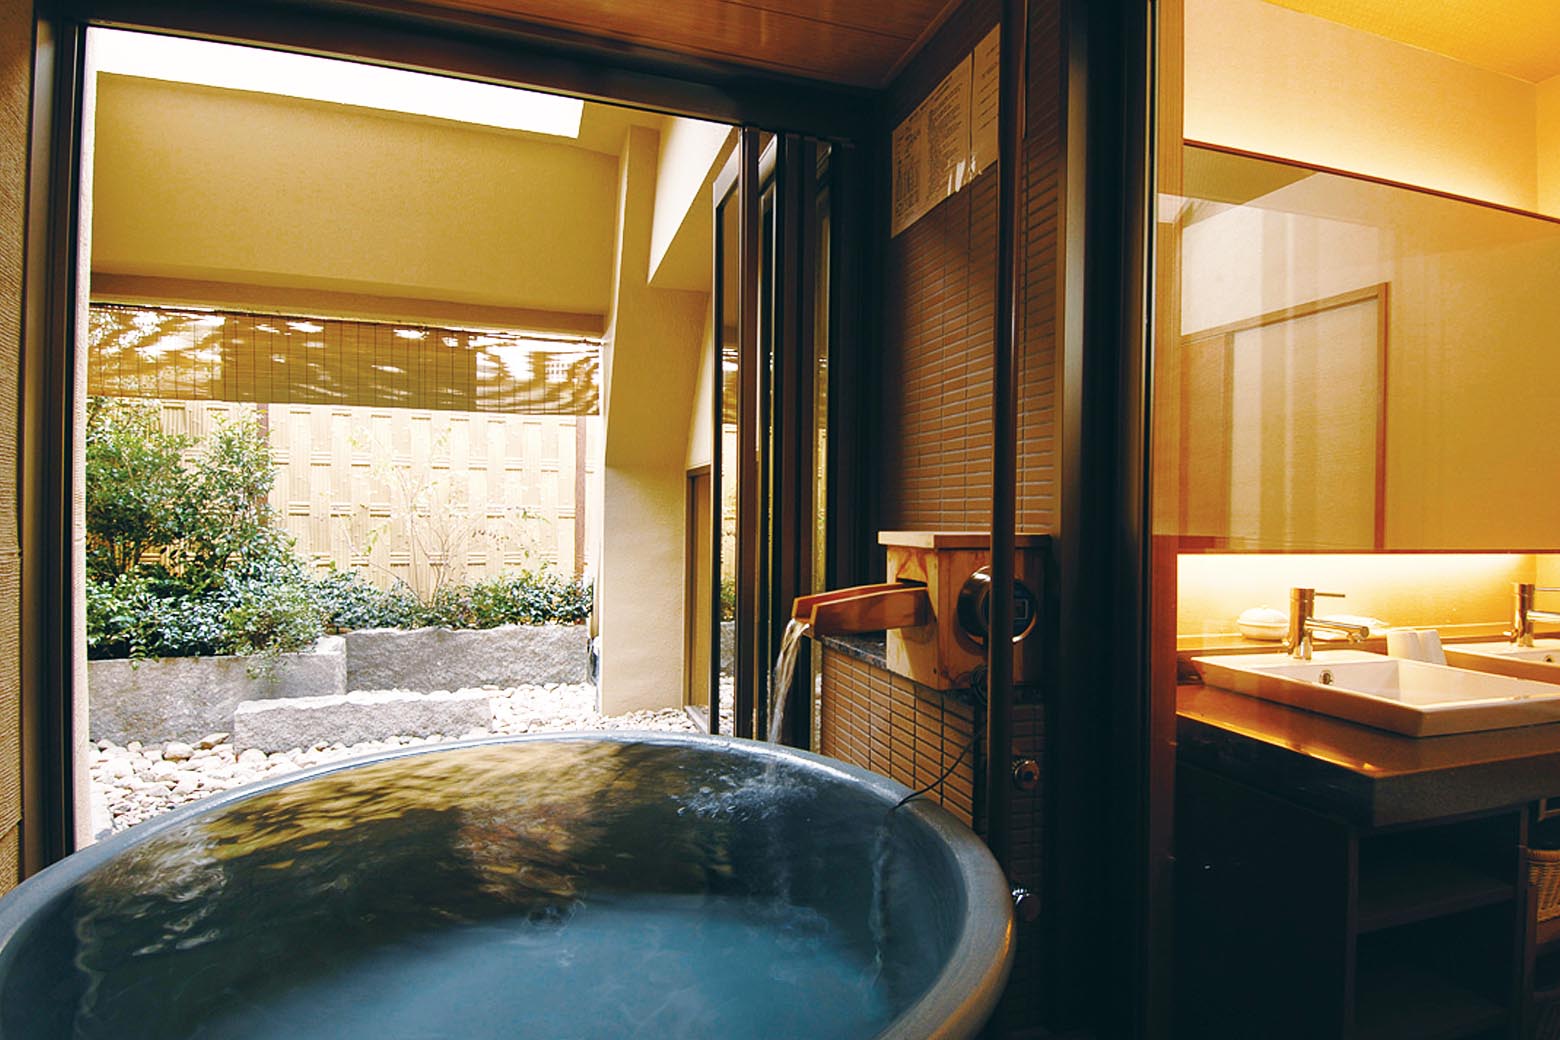 Rooms with Open-air Hot Springs Baths